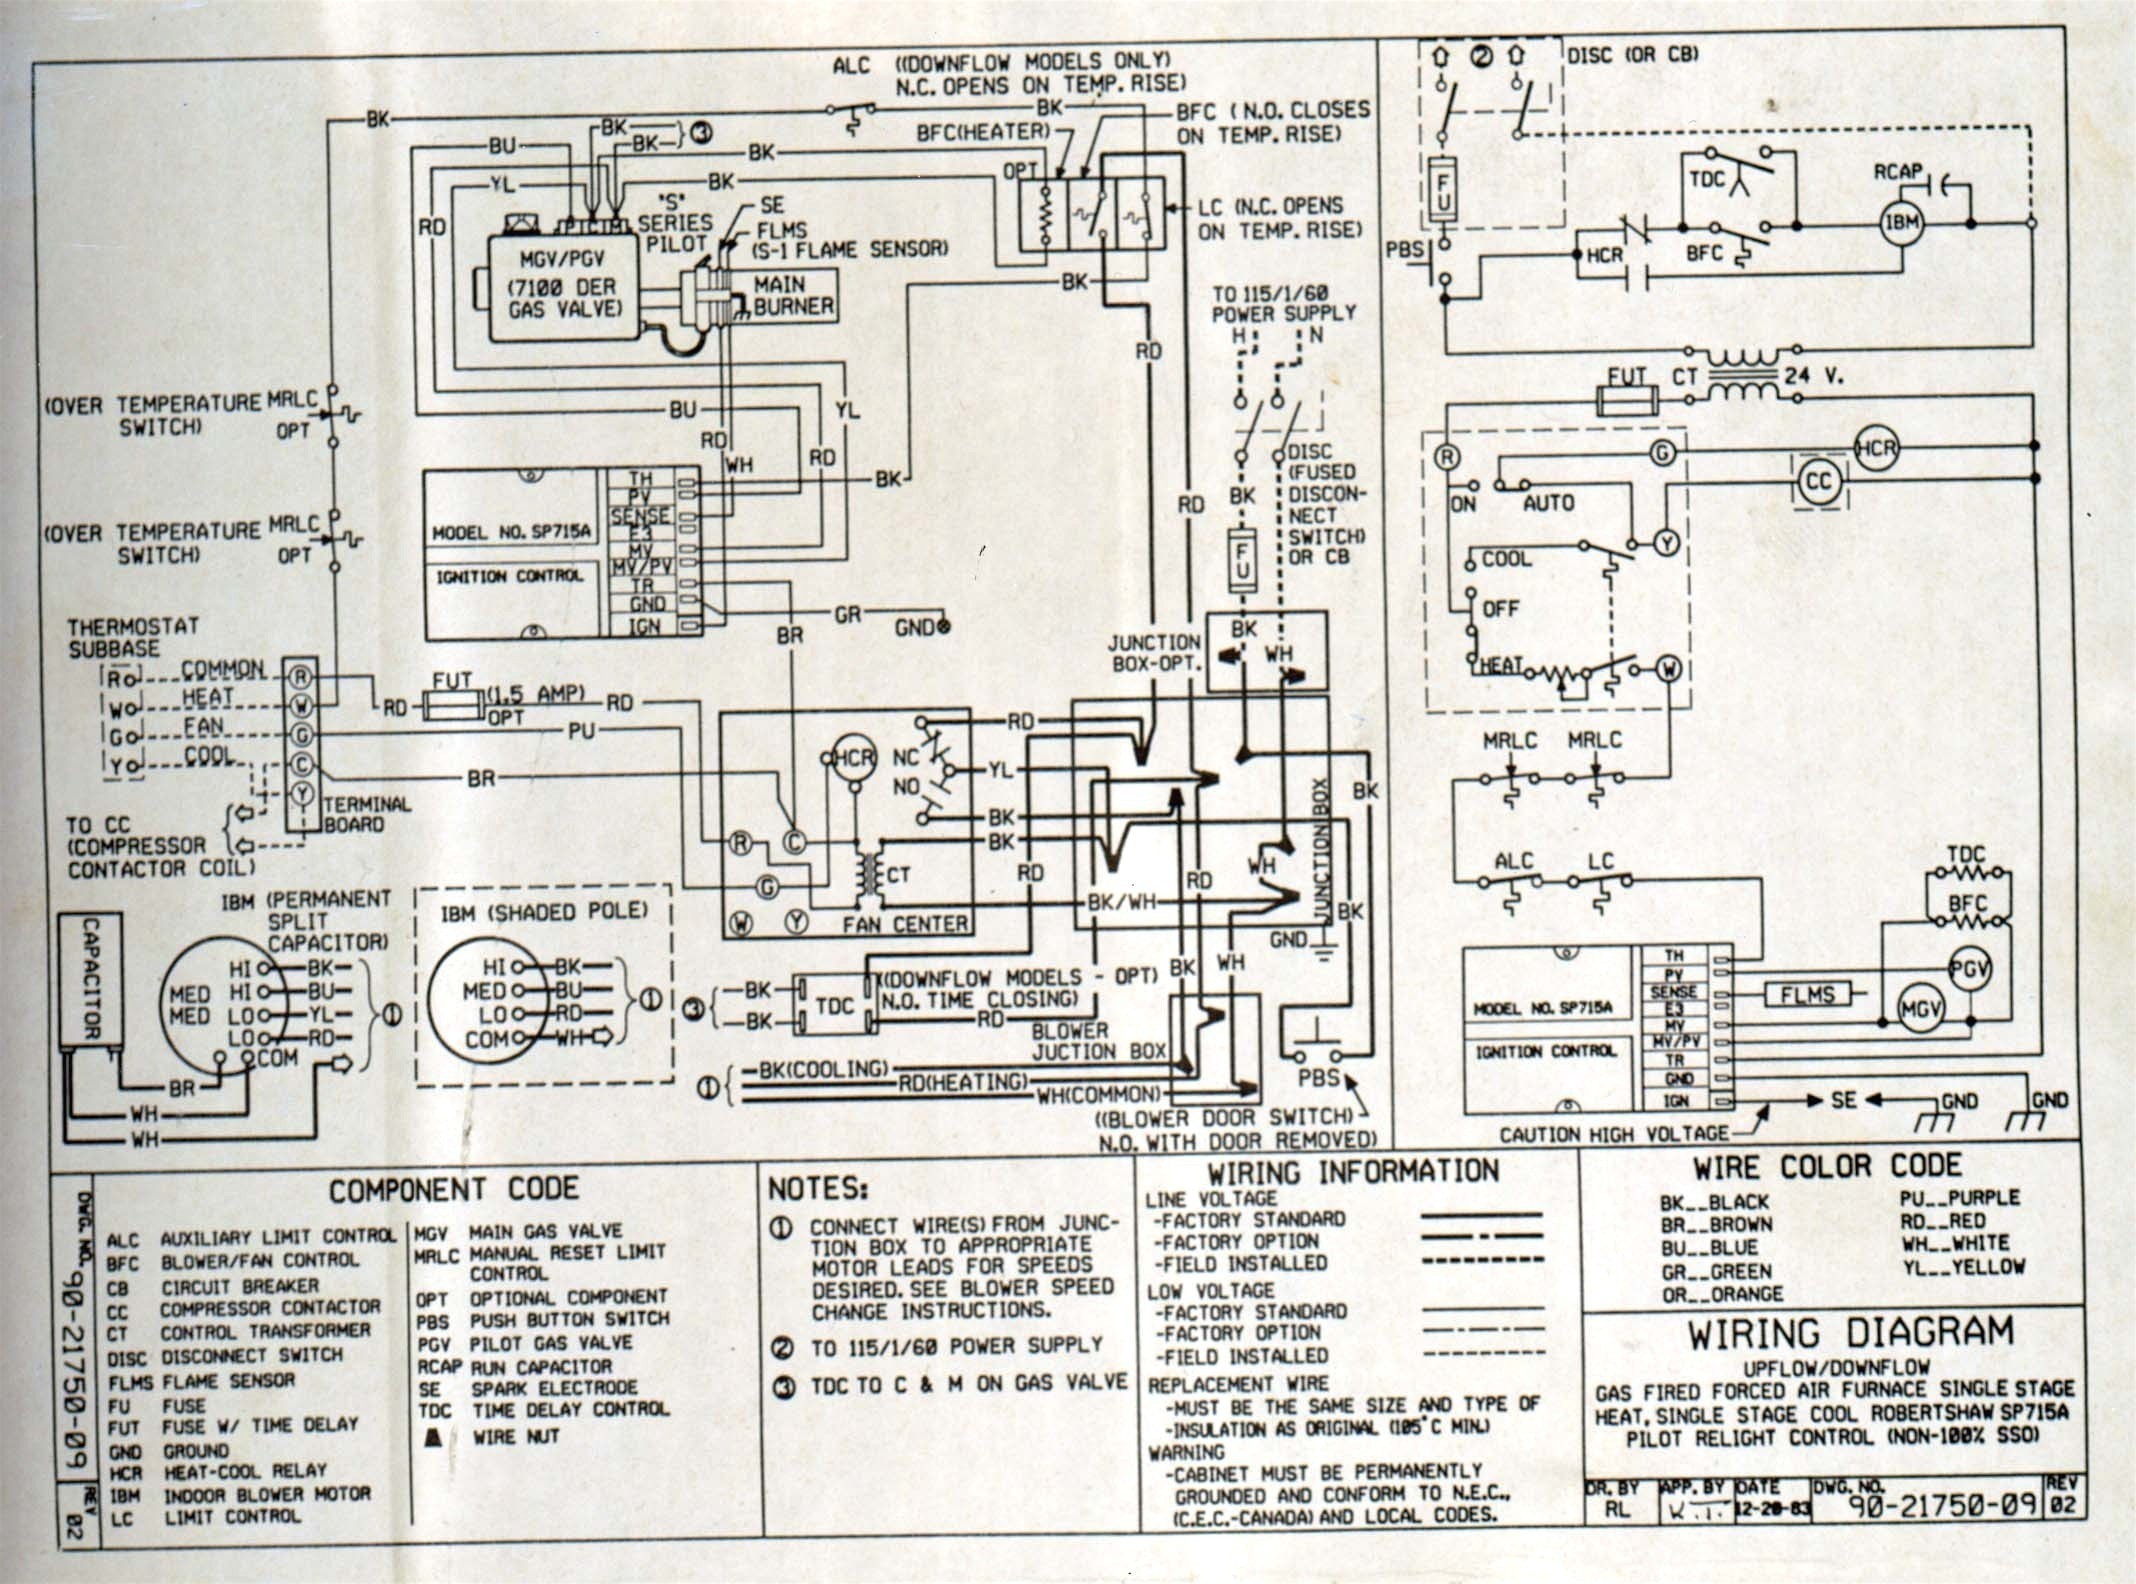 Gas Tank Diagram Wiring Diagram for Heating System New Heating and Cooling thermostat Of Gas Tank Diagram